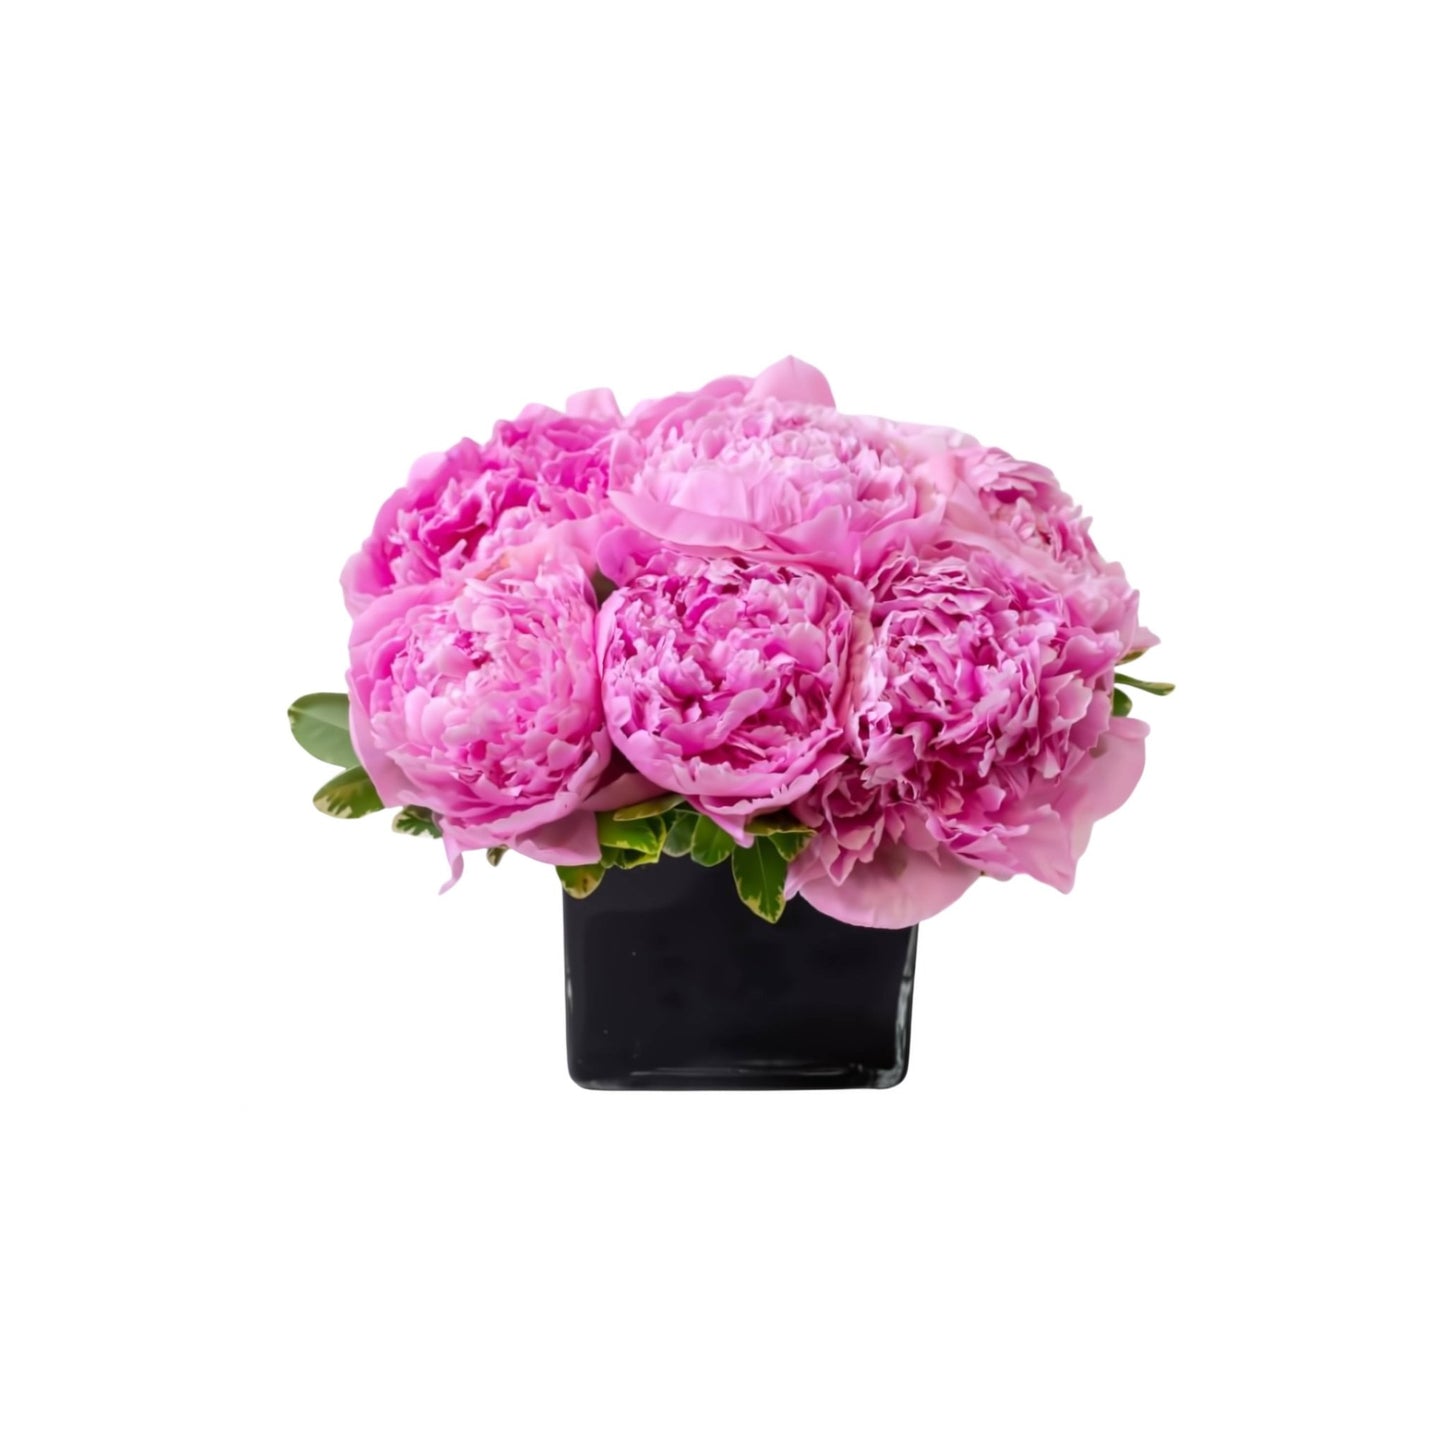 Amazing Peony - Floral Arrangement - Flower Delivery Brooklyn